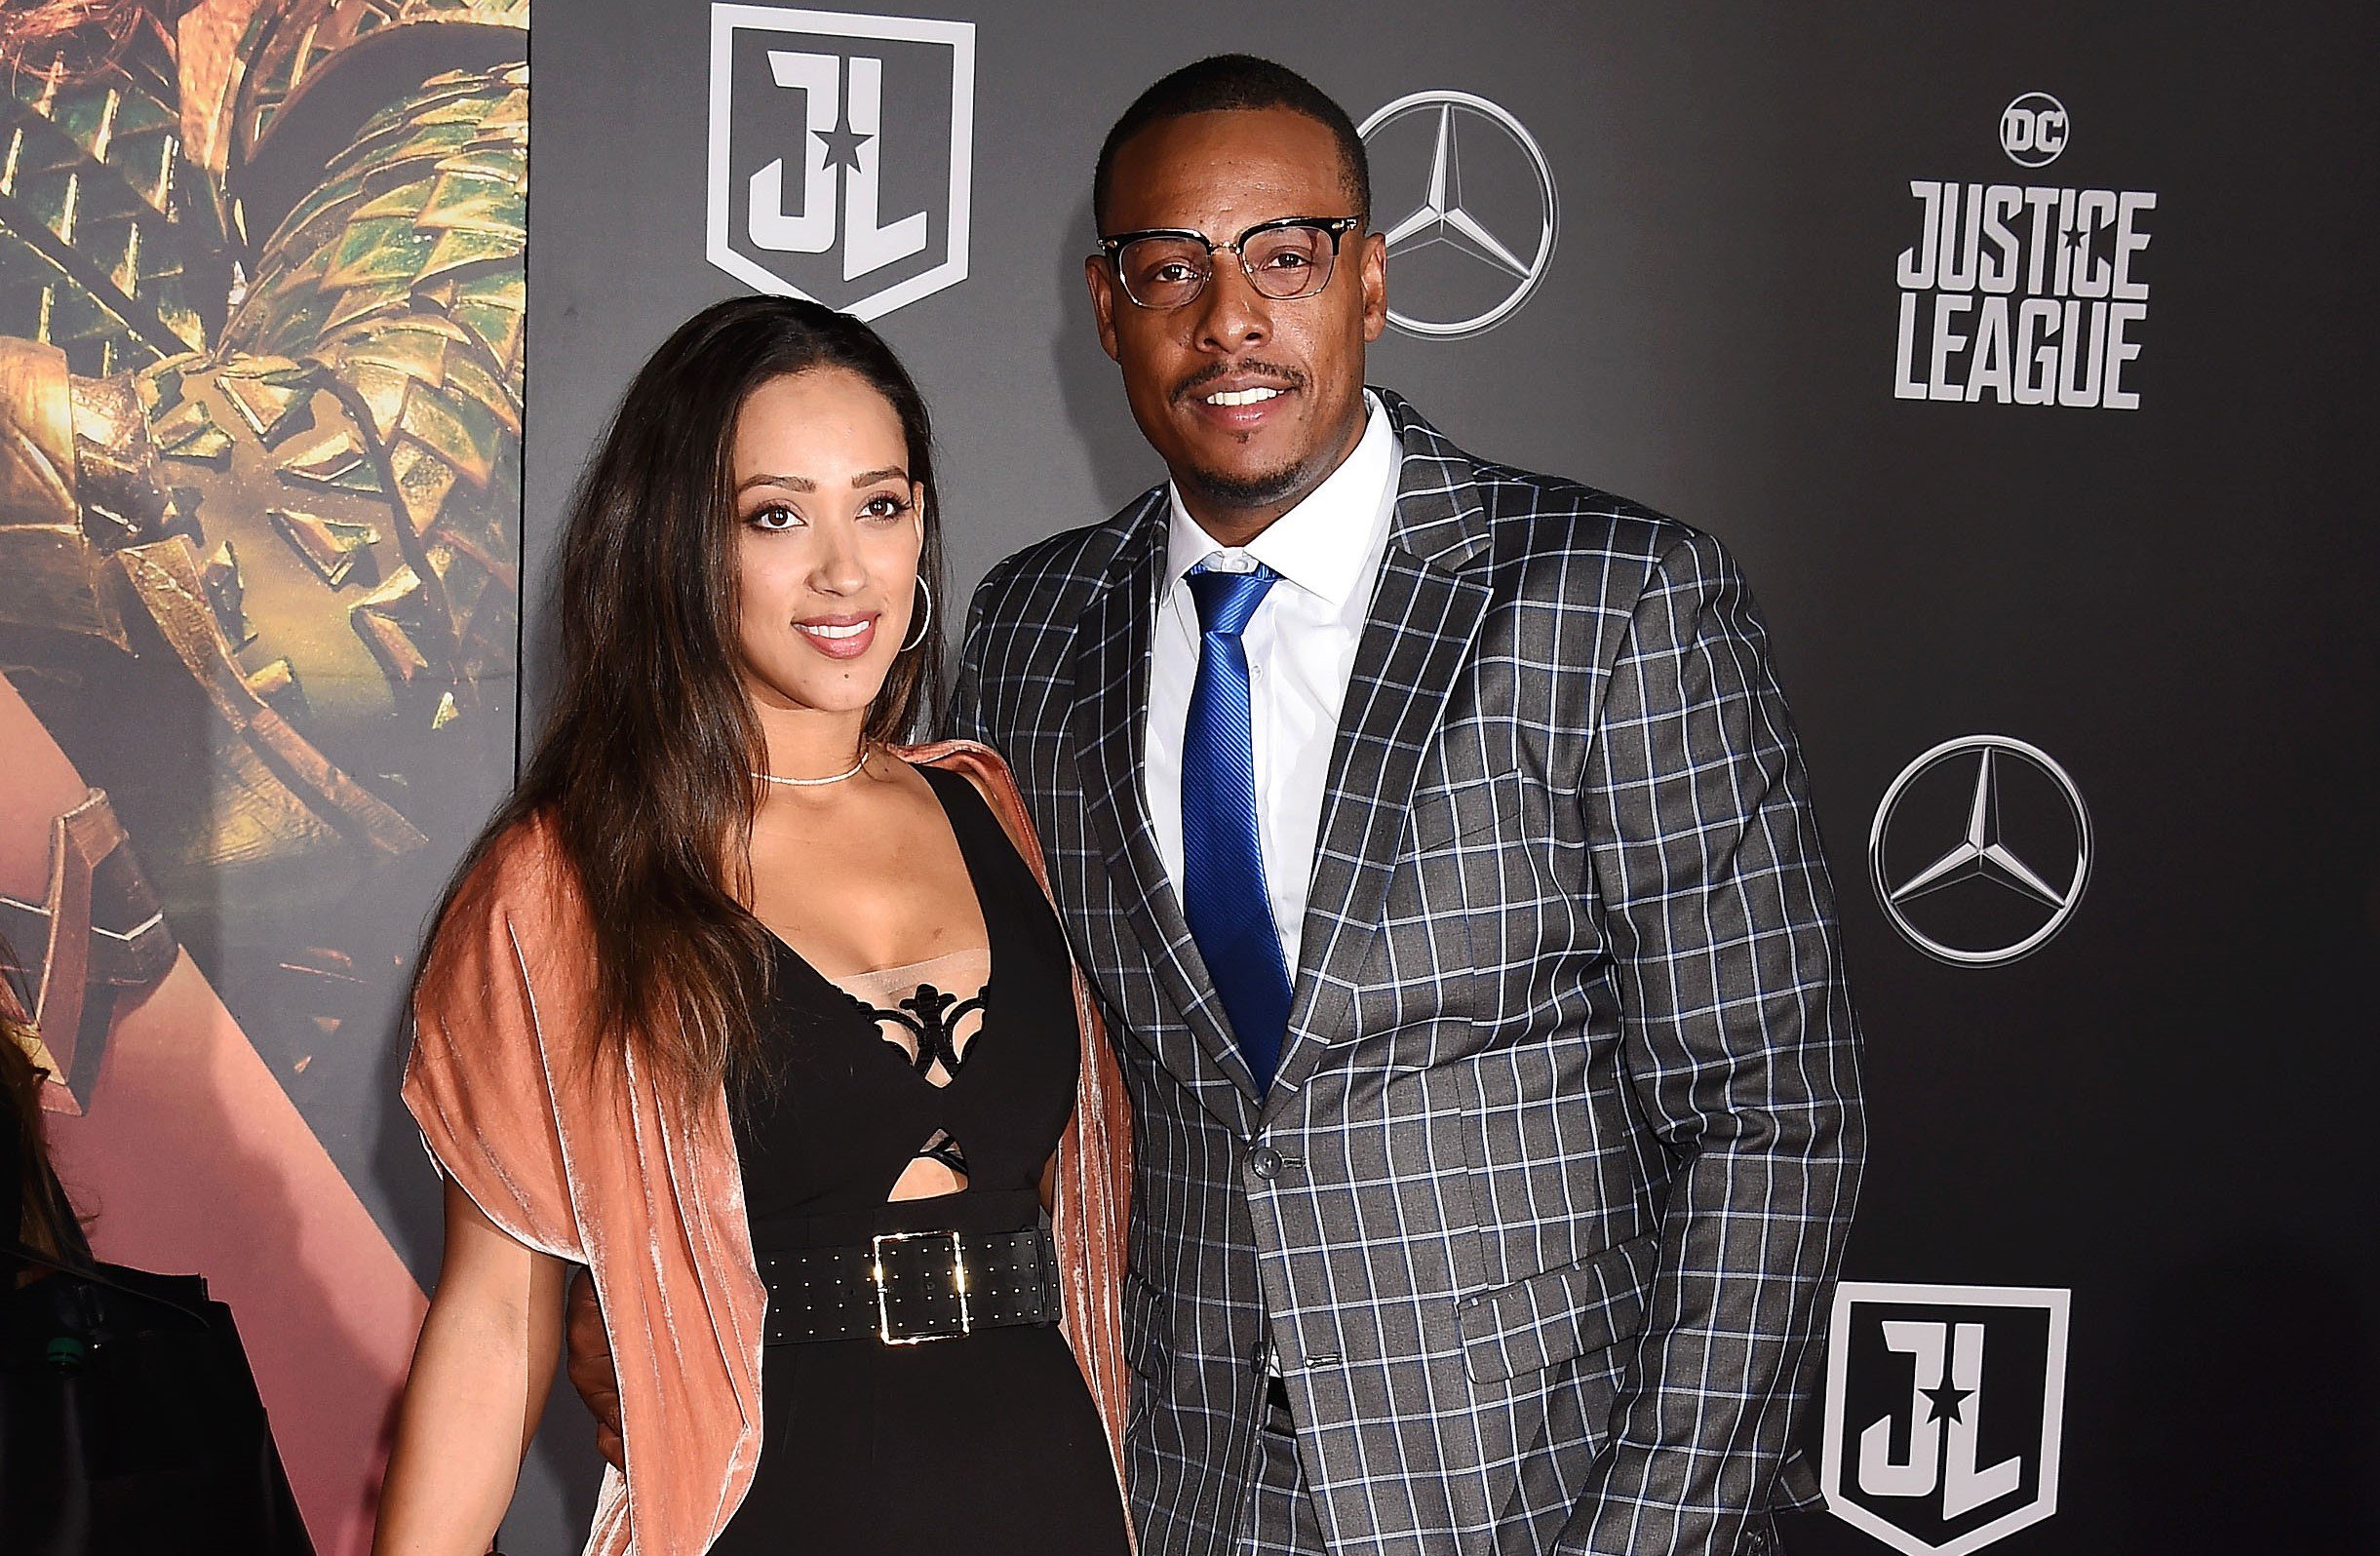 Former NBA player Paul Pierce in patterned suit and his wife, Julie Landrum, in a black dress posing on red carpet at movie premiere